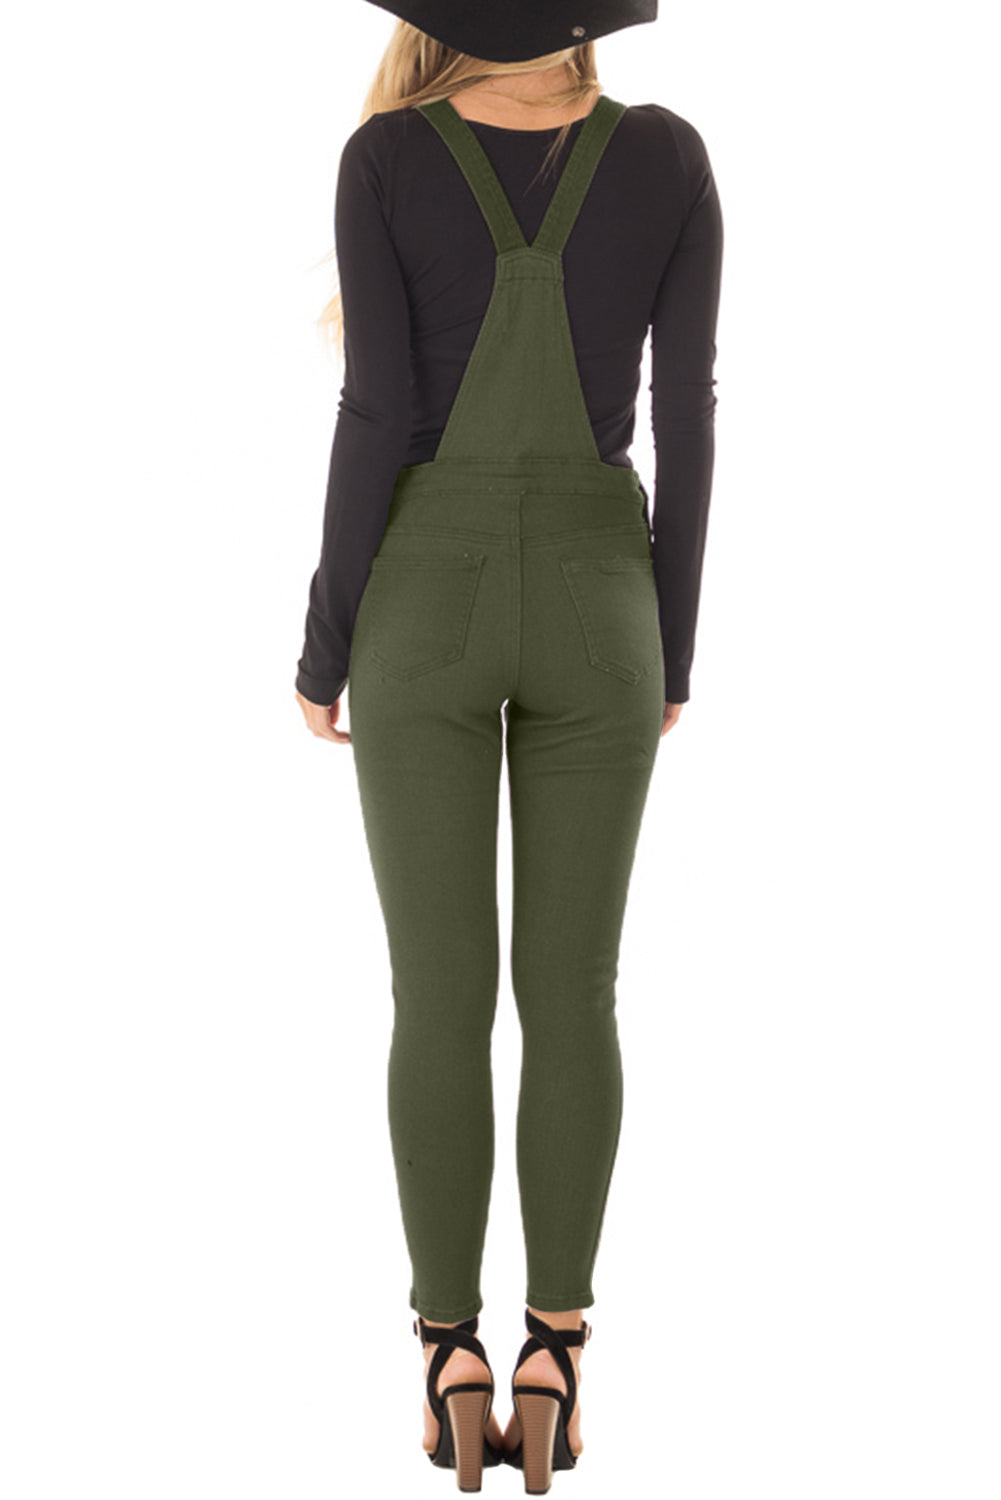 Army Green Denim Overall for Women Jeans JT's Designer Fashion